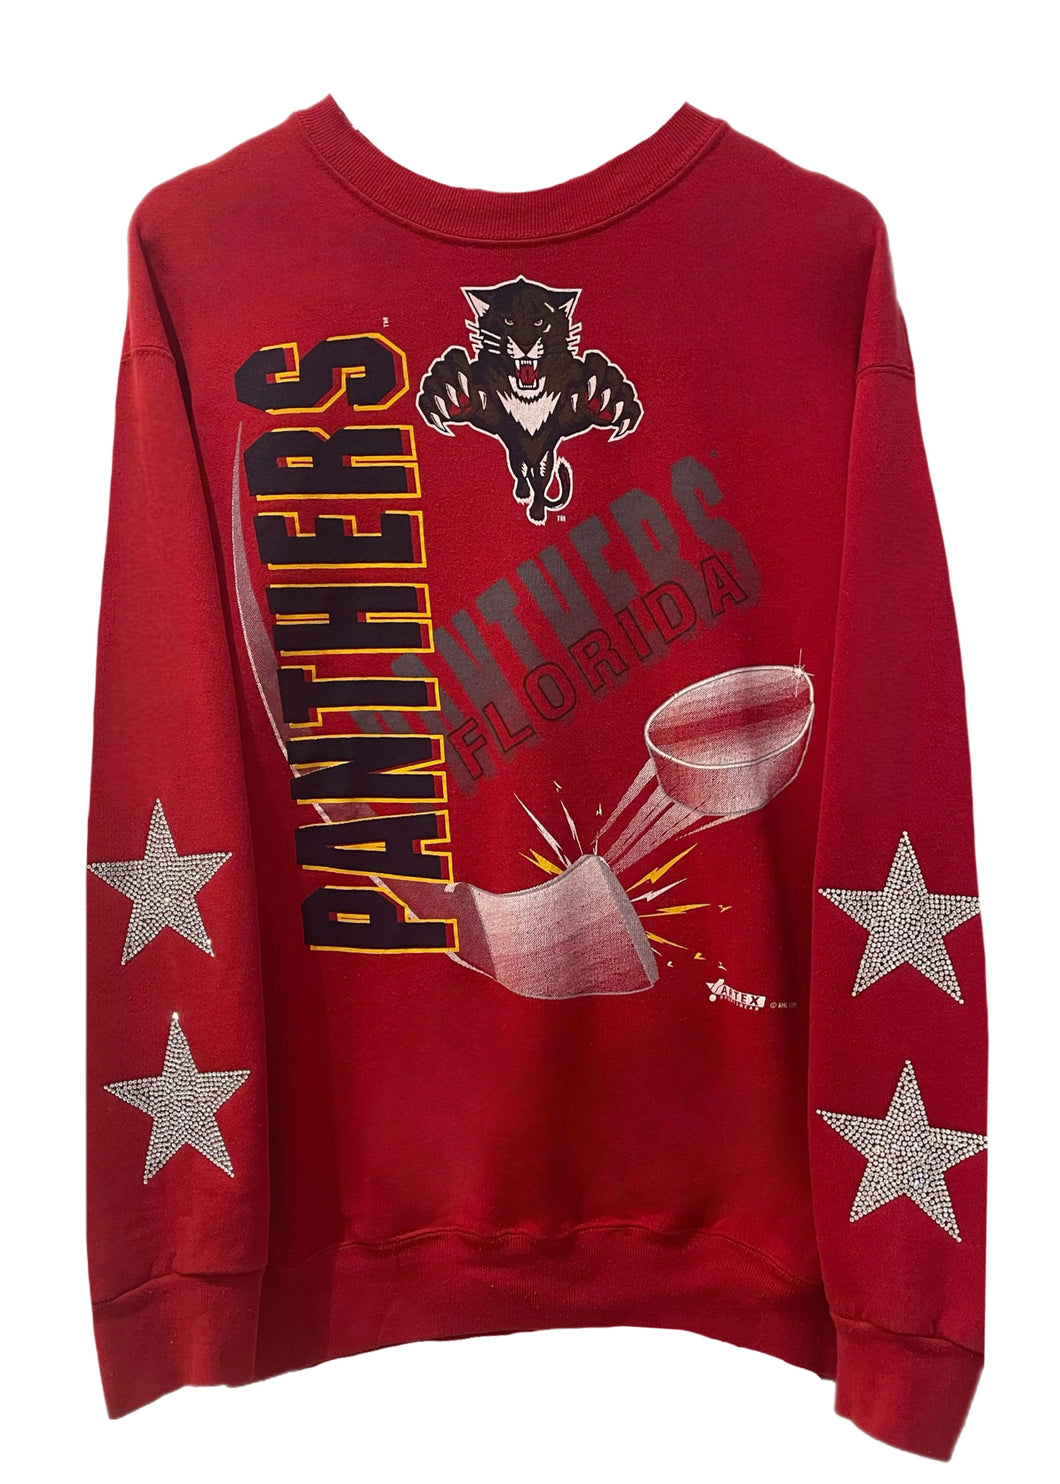 Florida Panthers, Hockey One of a KIND Vintage Sweatshirt with Crystal Star Design